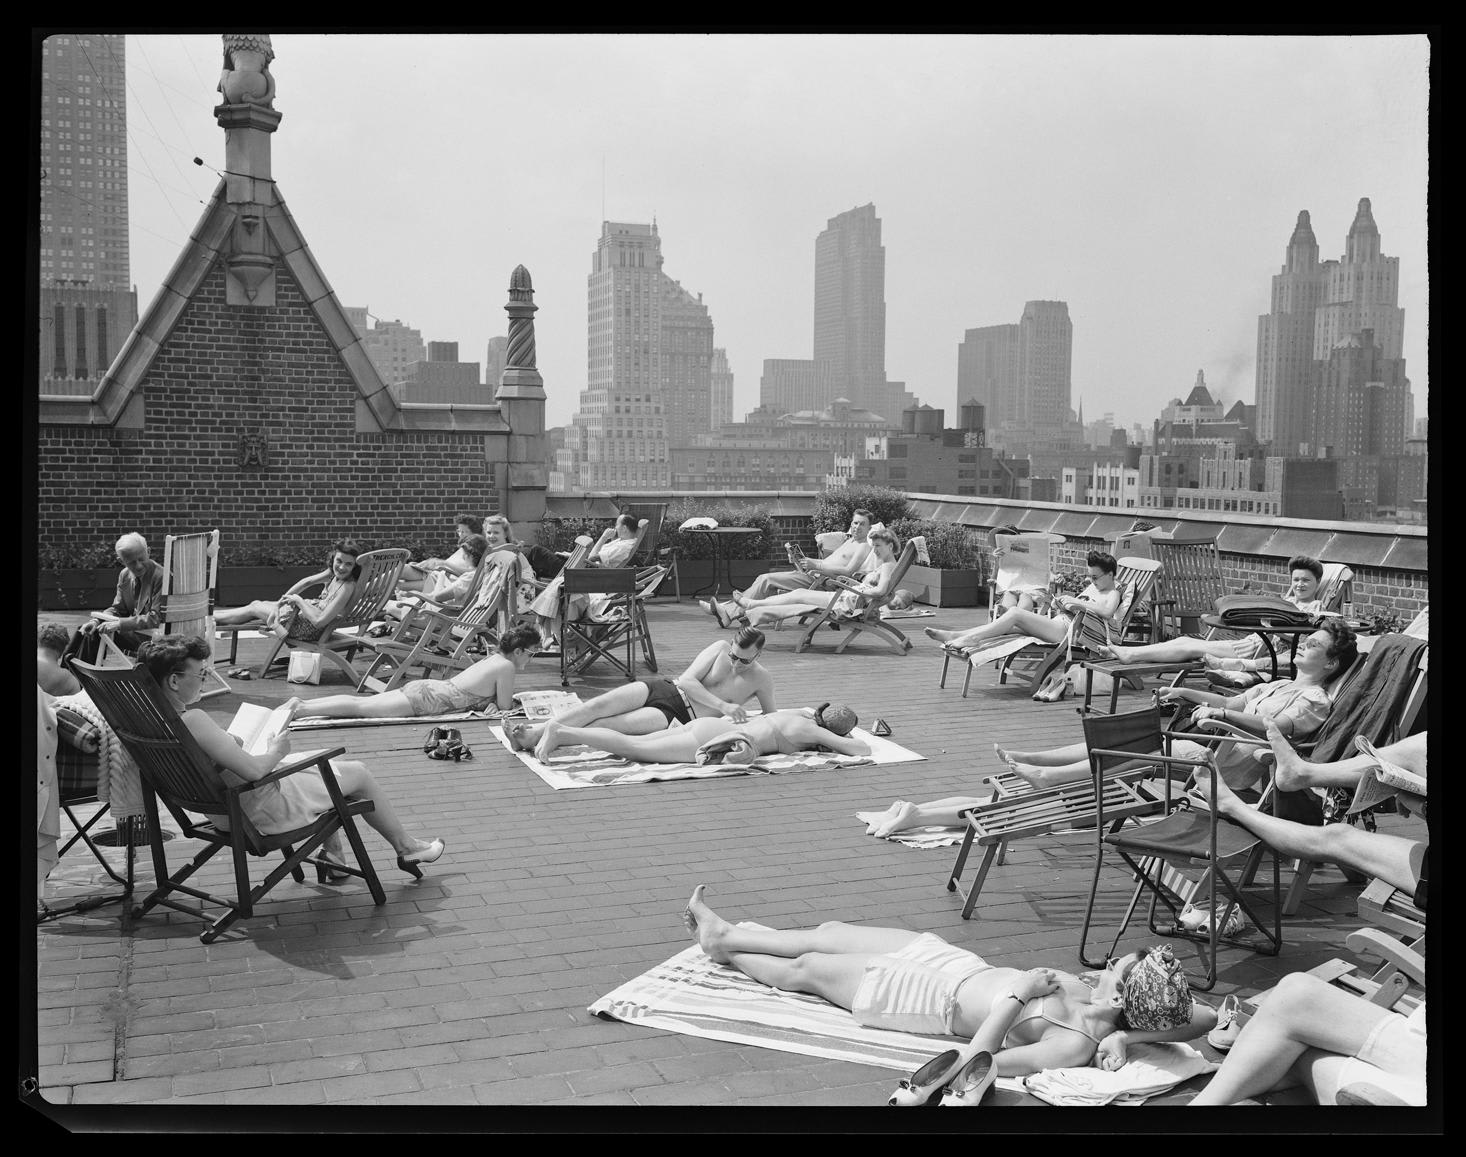 Sunbathing on the roof of an apartment building in Tudor City, New York, 1943.